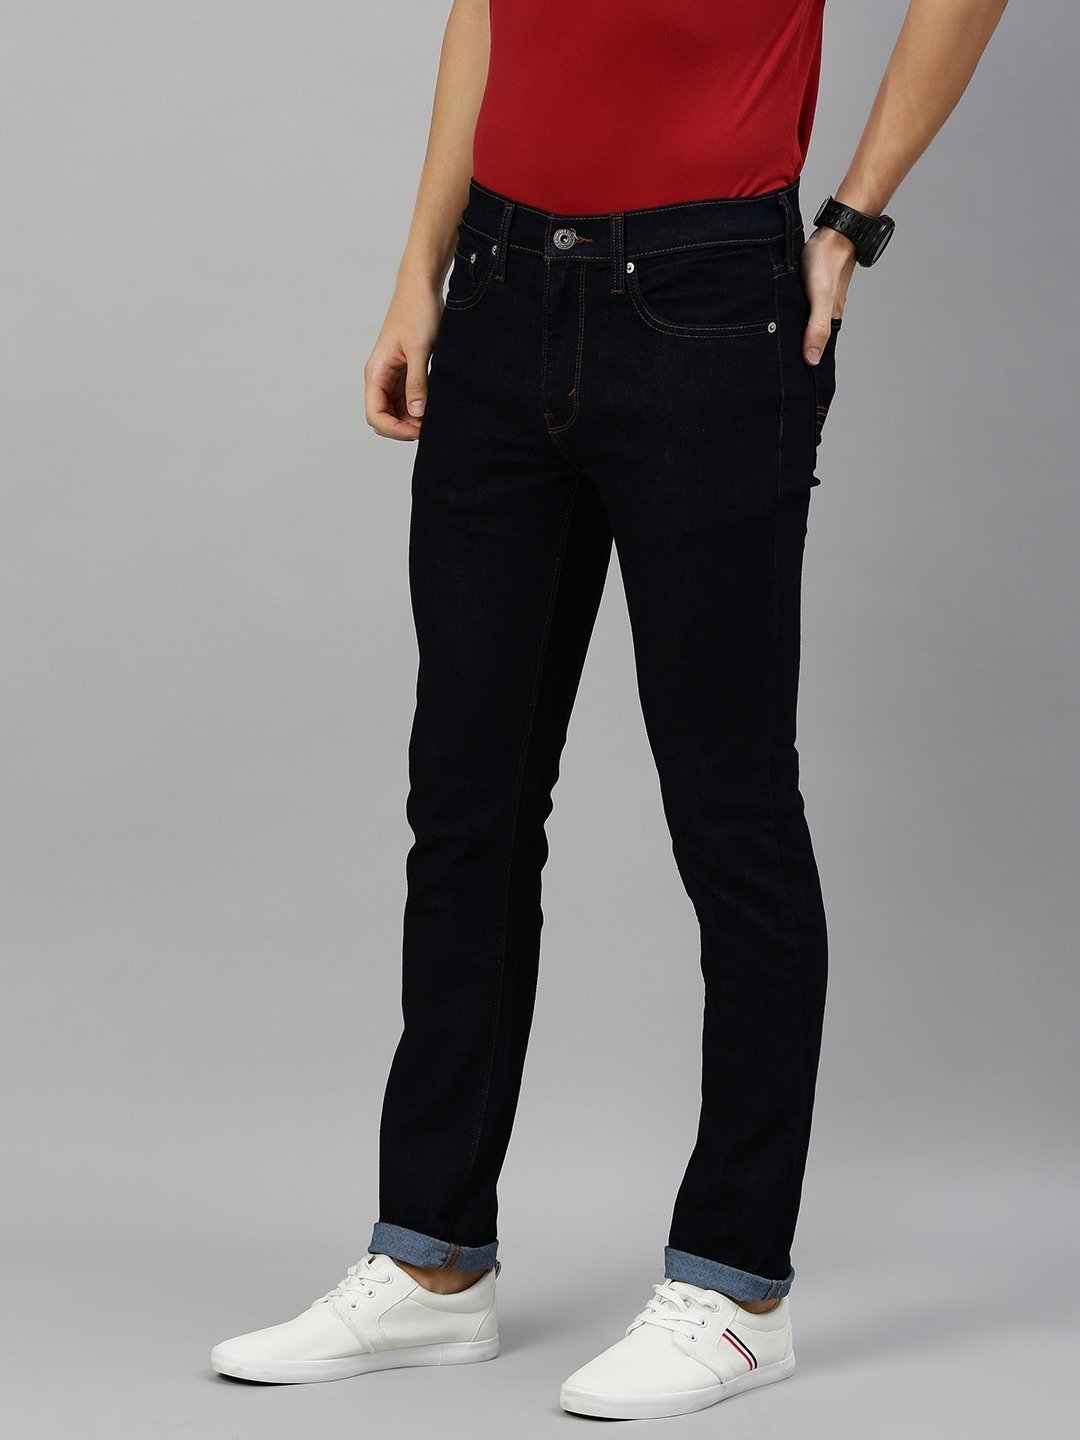 Men Blue 288 Skinny Fit Mid-Rise Clean Look Stretchable Jeans-13925-0004